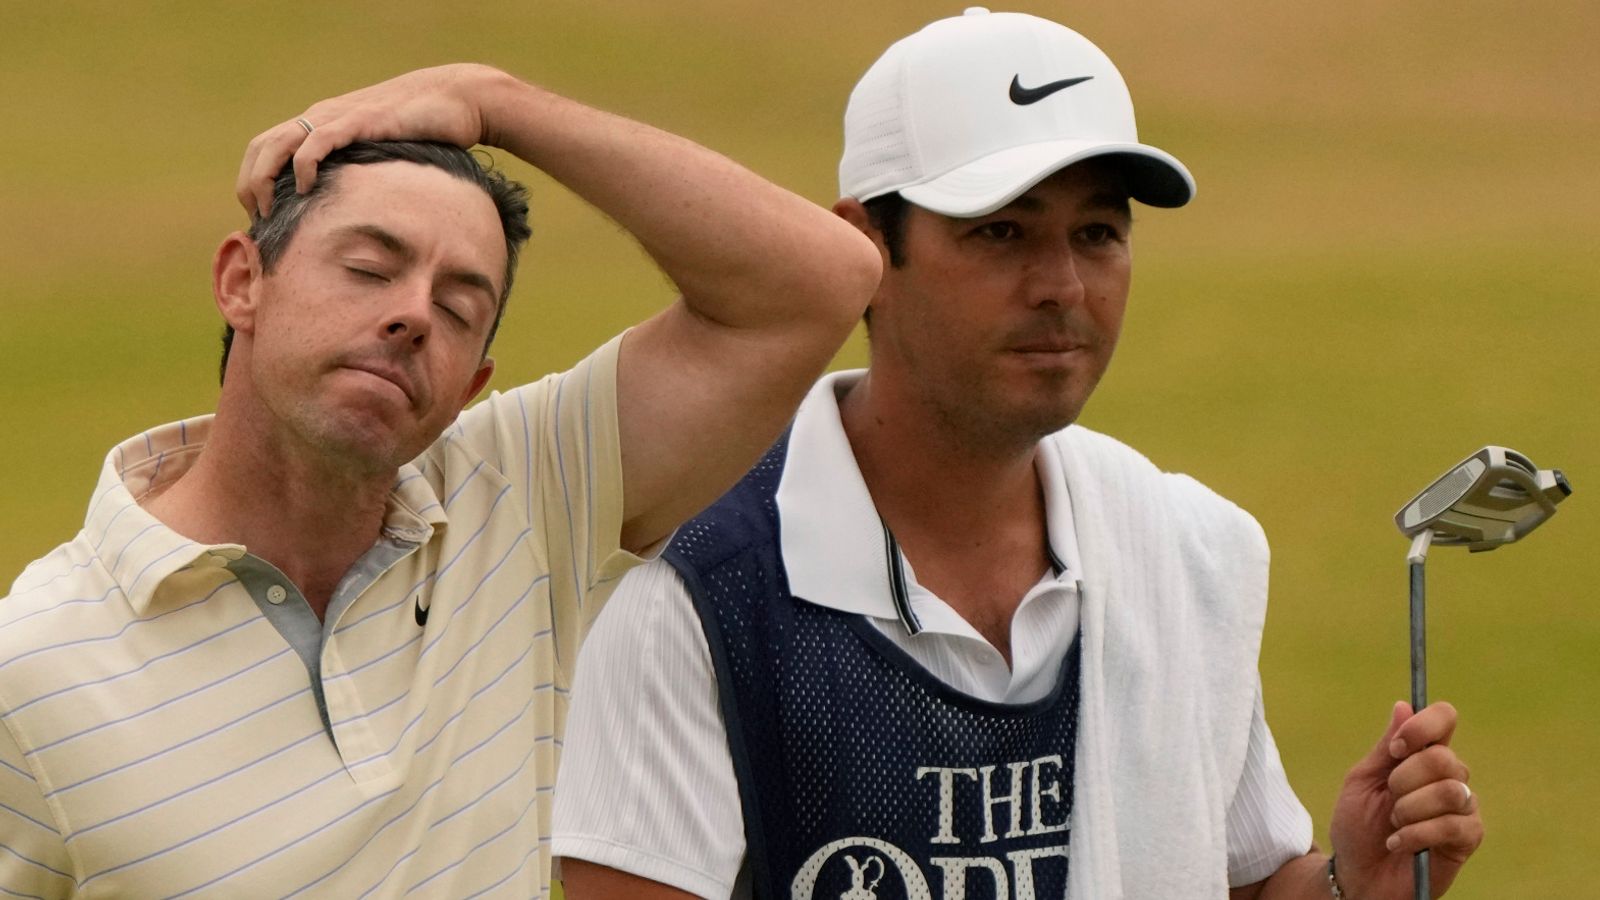 The 150th Open: Rory McIlroy felt major challenge ‘slip away’ during final round at St Andrews